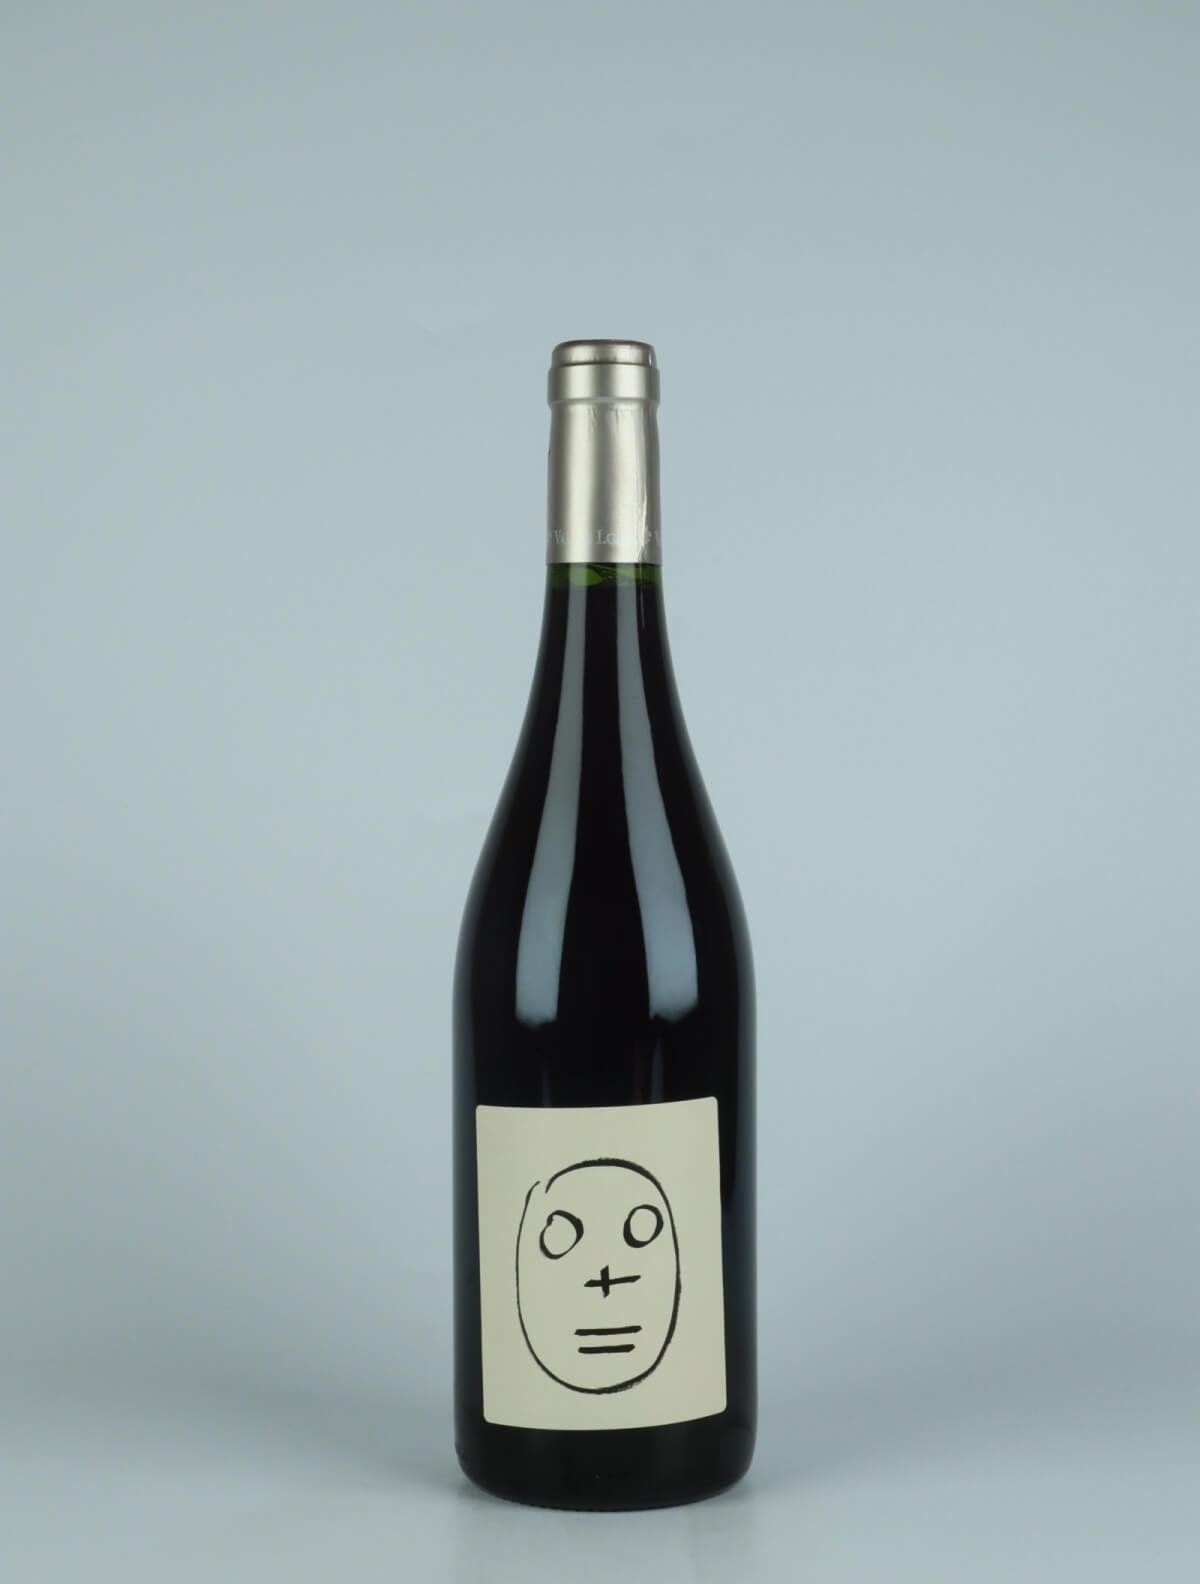 A bottle 2021 Toto Red wine from Les Vignes de Babass, Loire in France